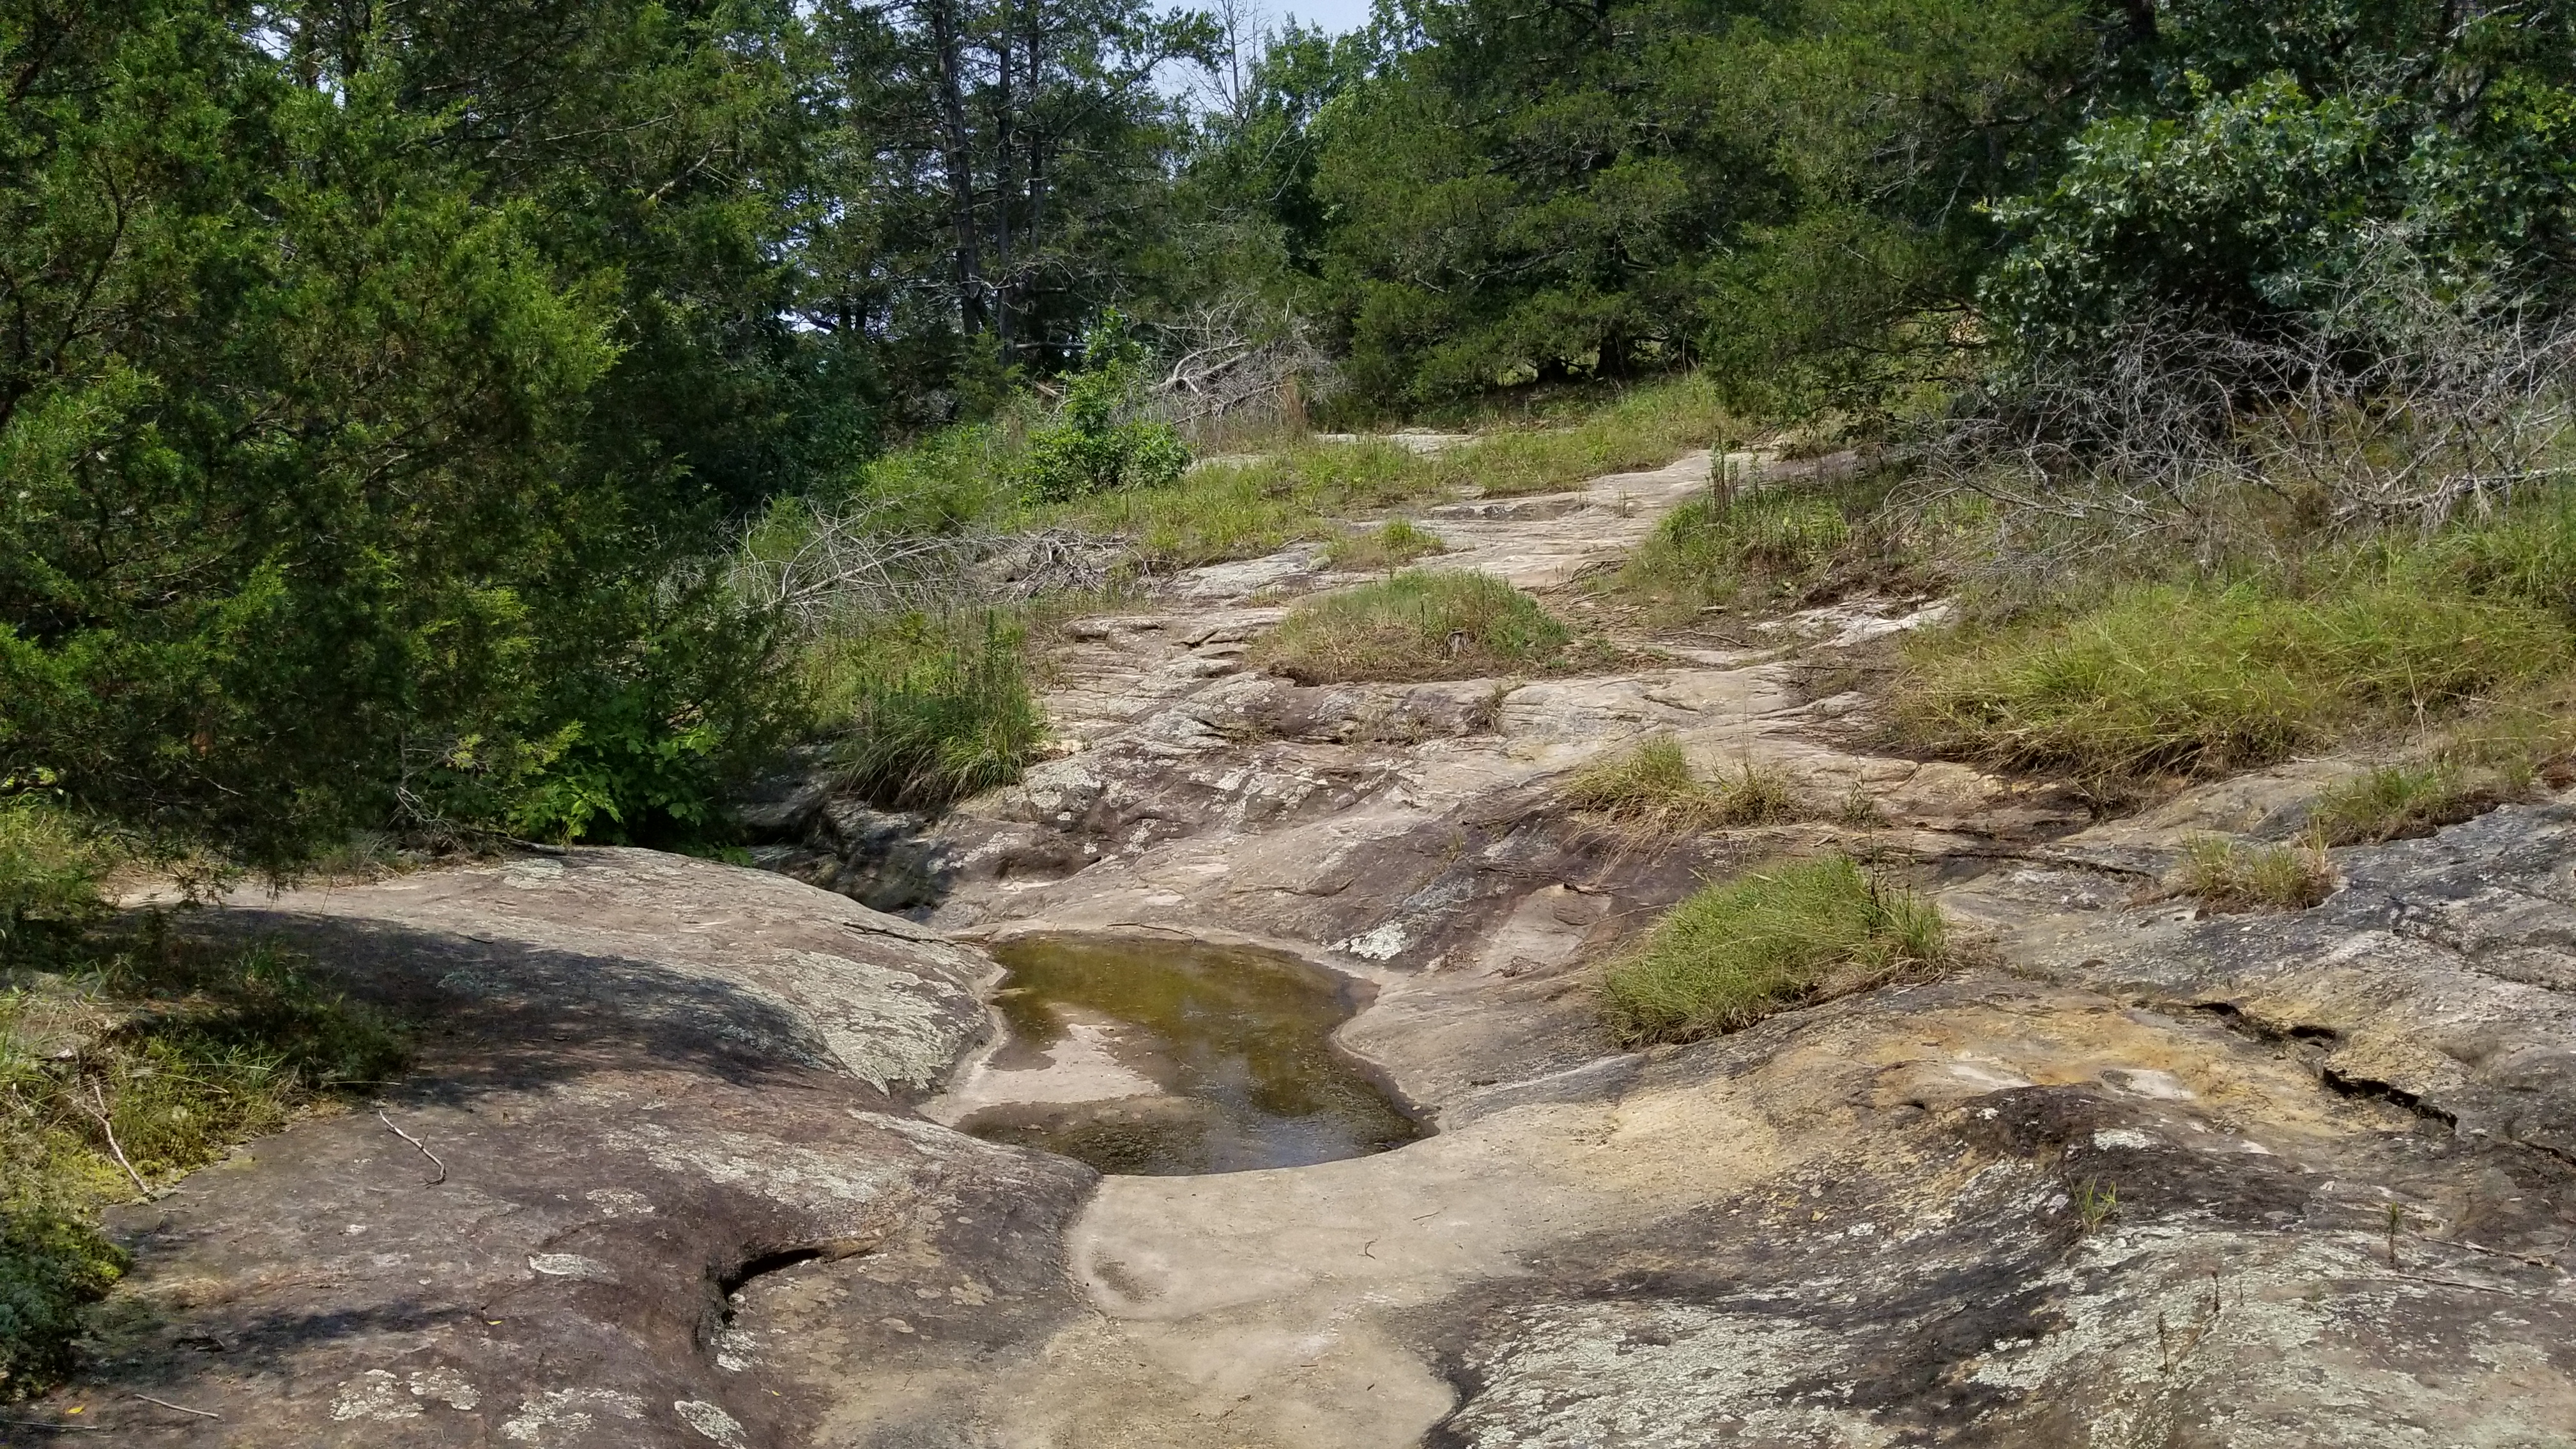 A rocky sandstone slope with a trickle of water. When it rains, it becomes a waterfall. 